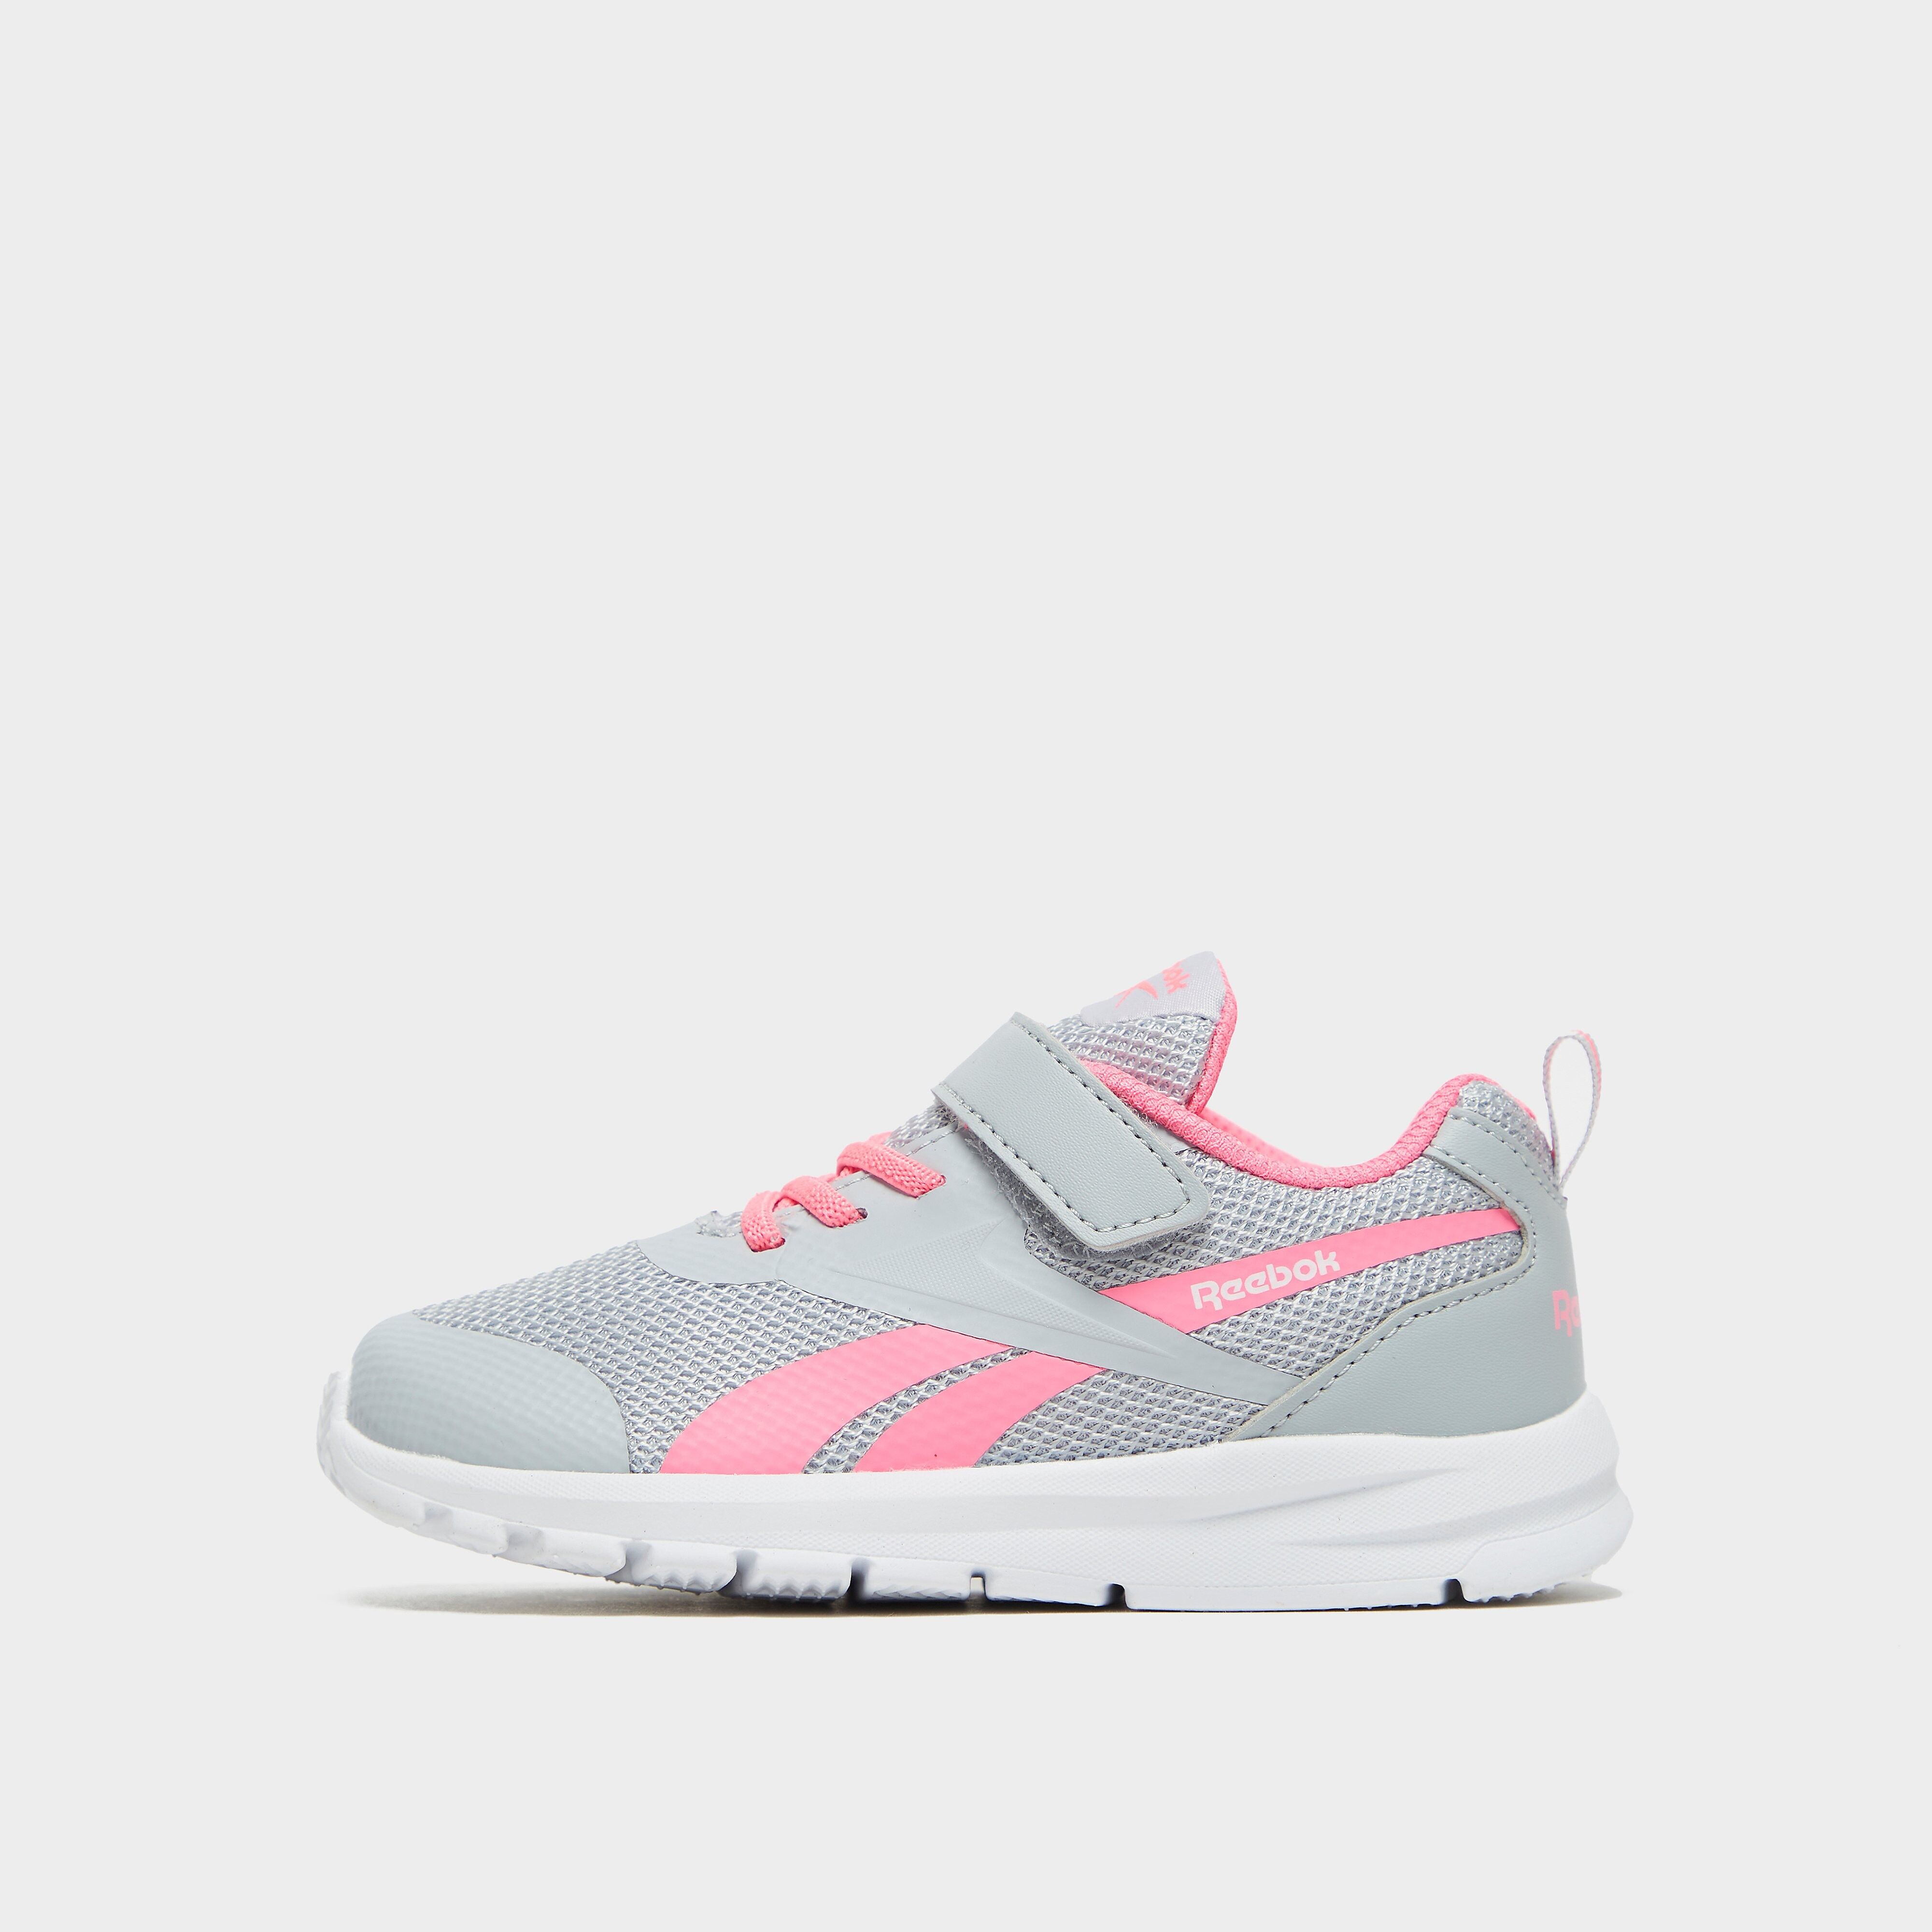 Reebok Rush Runner Infant - Cold Grey 2 / Electro Pink / White  size: 9.5